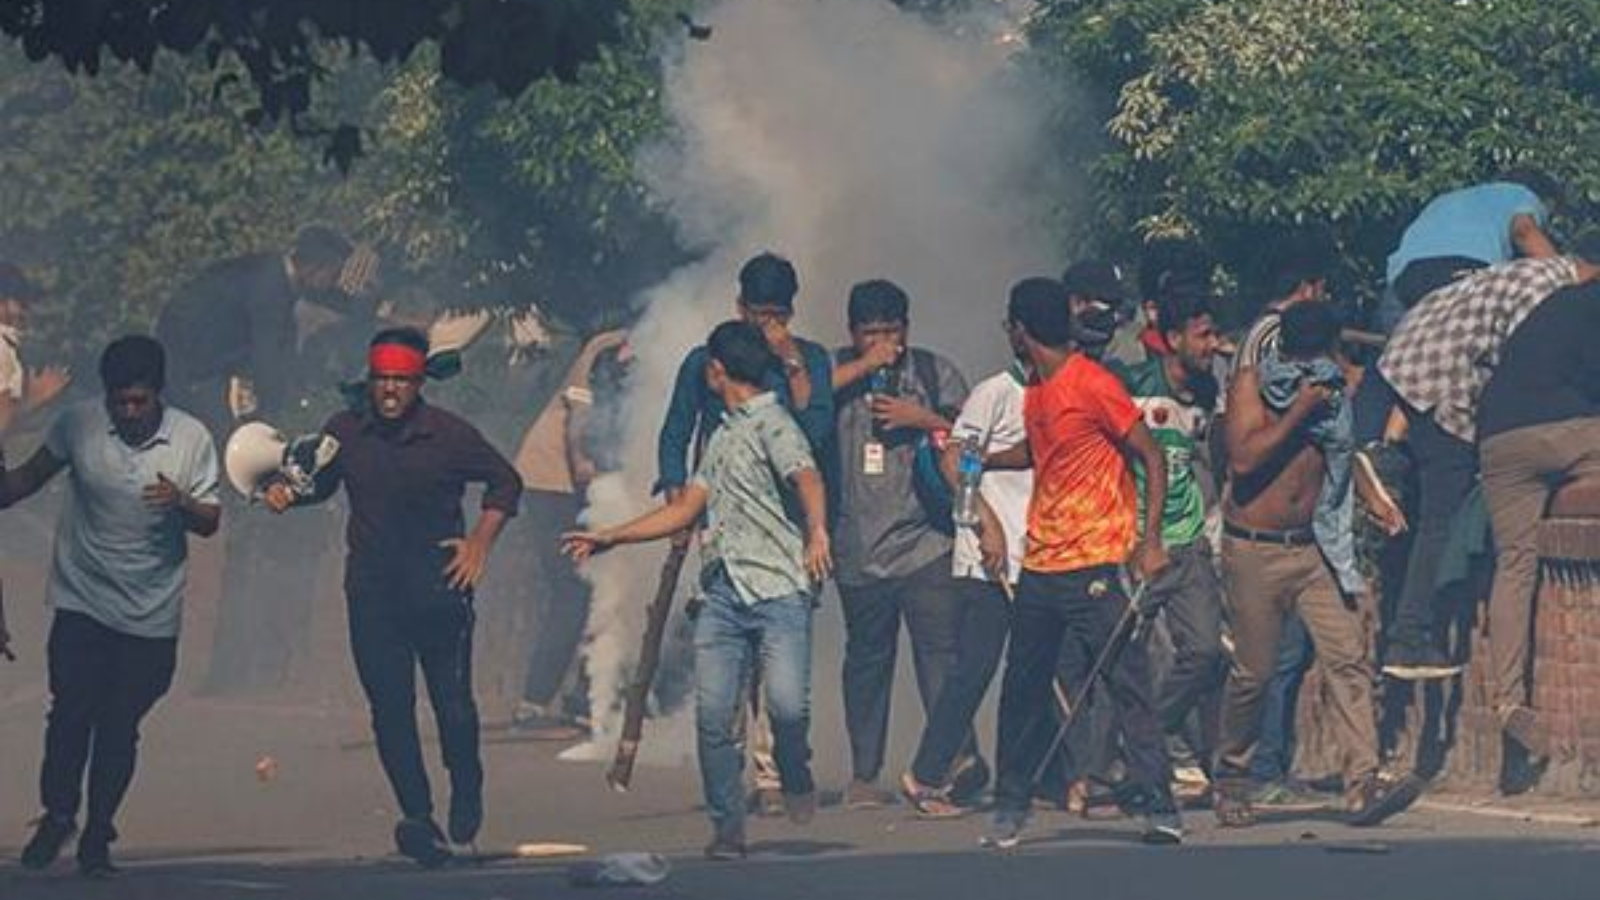 Amid Bangladesh anti-quota protests, High Commission in Dhaka asks Indians to avoid travel